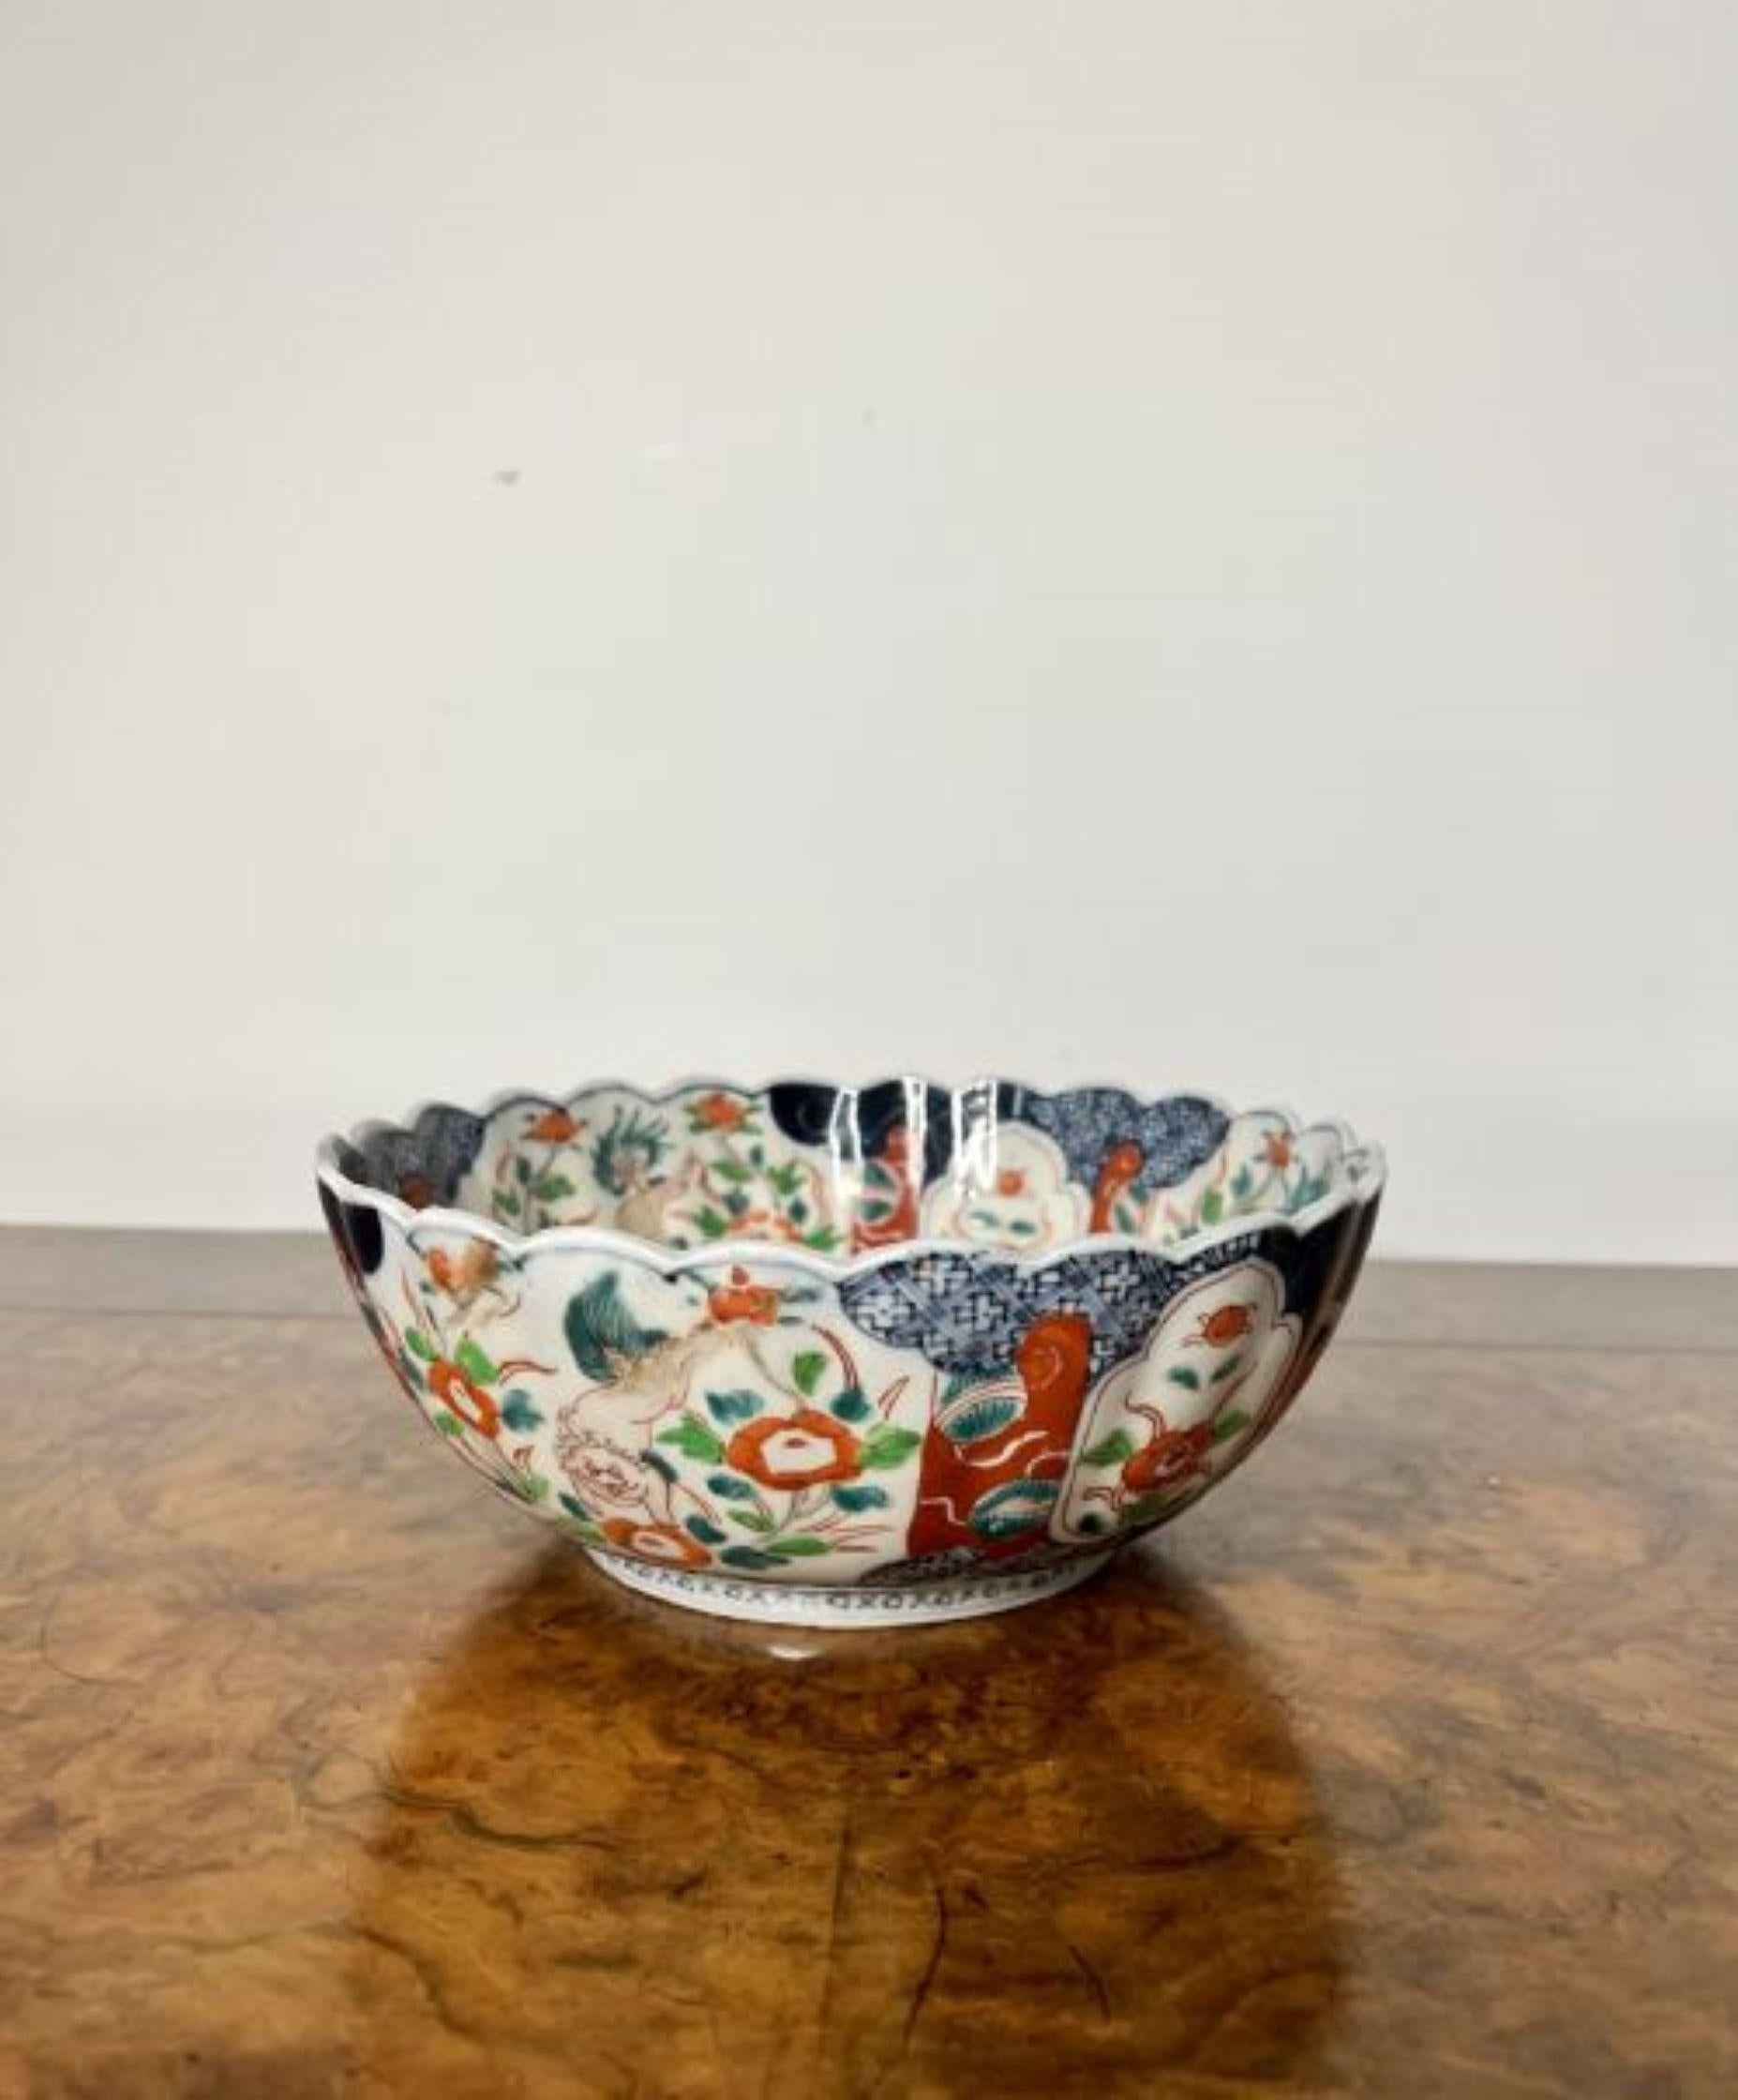 Quality antique Japanese Imari bowl with a scalloped shaped edge  1